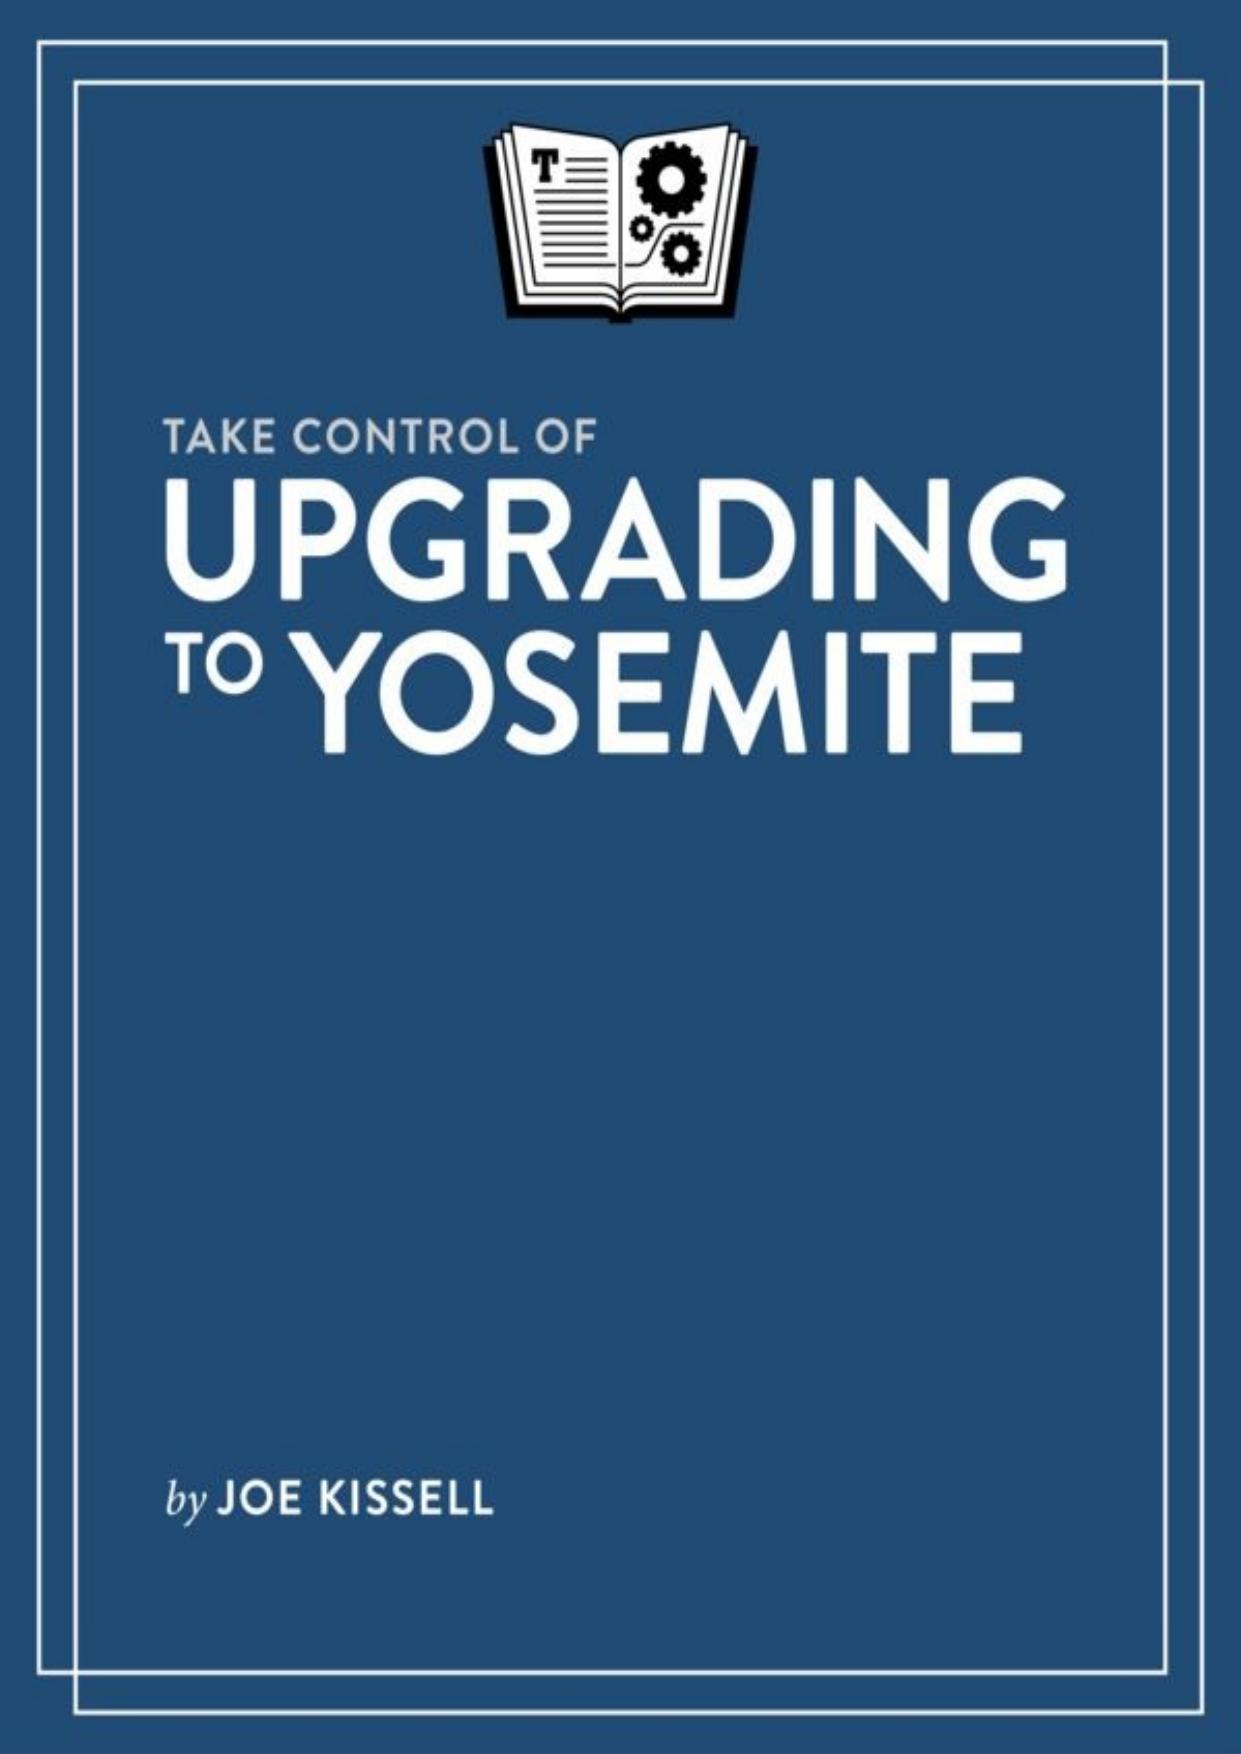 Take Control of Upgrading to Yosemite by Joe Kissell